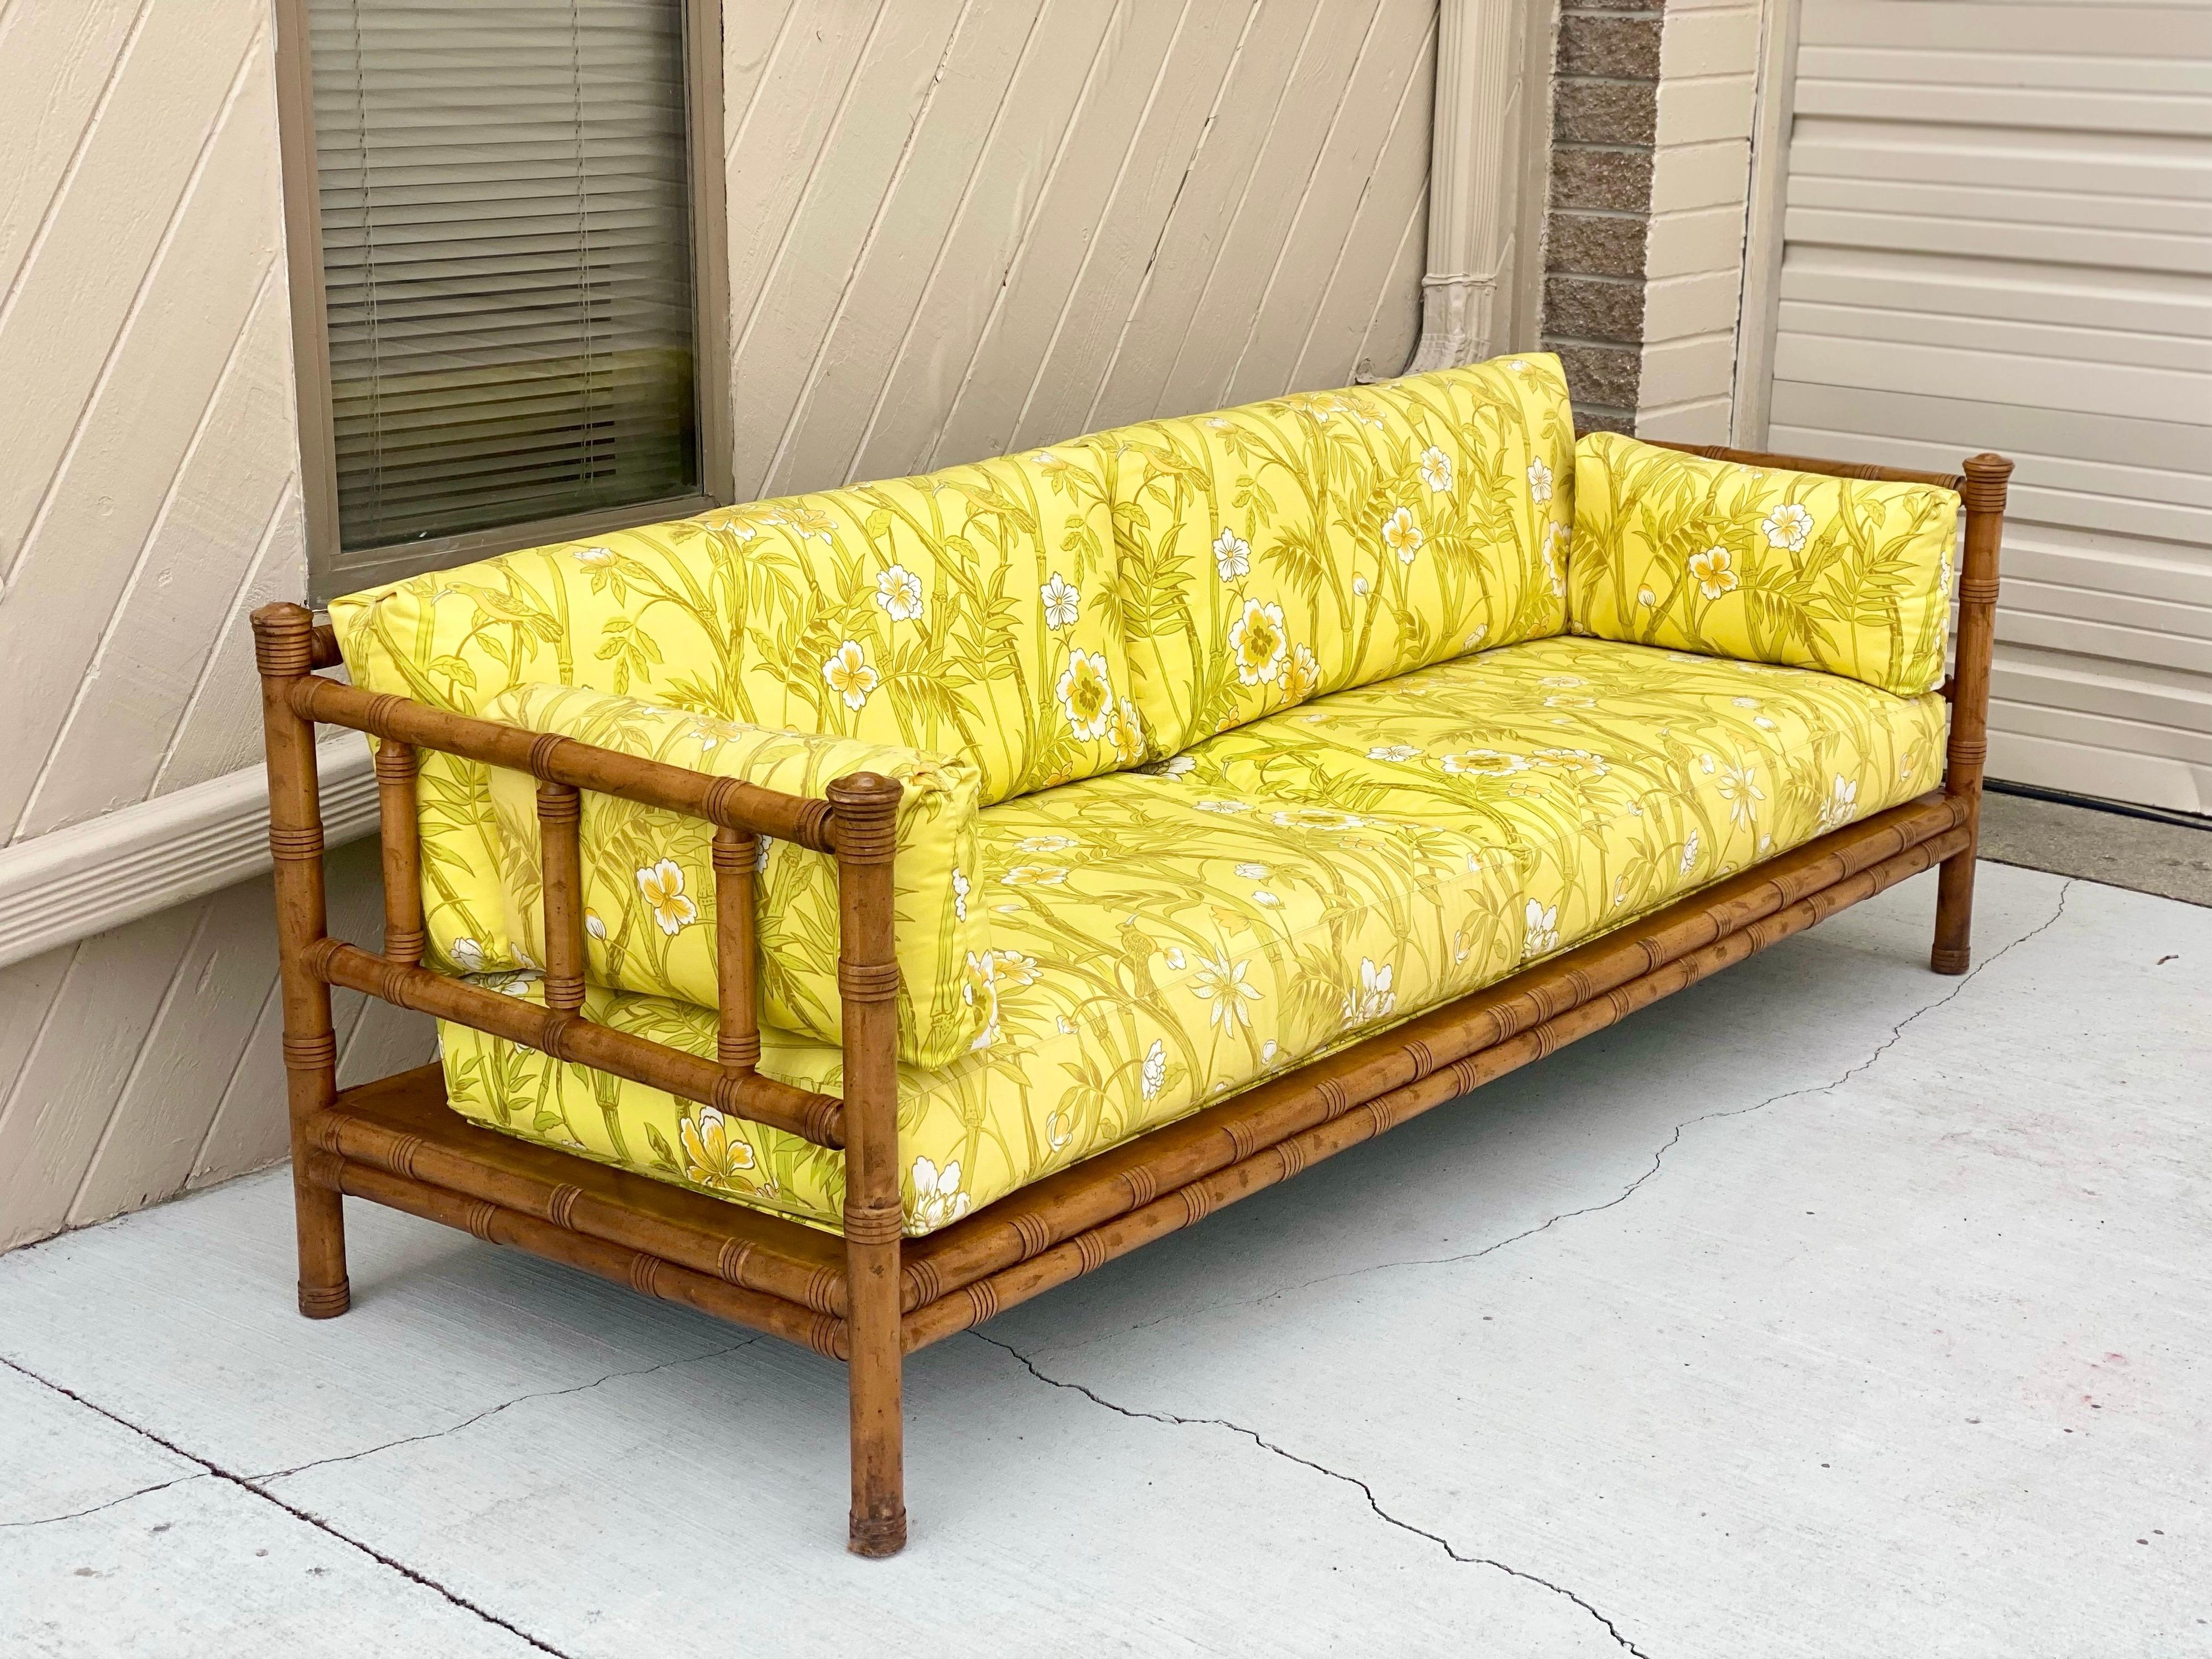 1970s Drexel Heritage Chinoiserie bamboo sofa 
We are very pleased to offer a beautiful, Chinoiserie style sofa by Drexel Heritage, circa the 1970s. Showcasing an oversized bamboo style frame and plush cushions, this piece is super comfortable yet